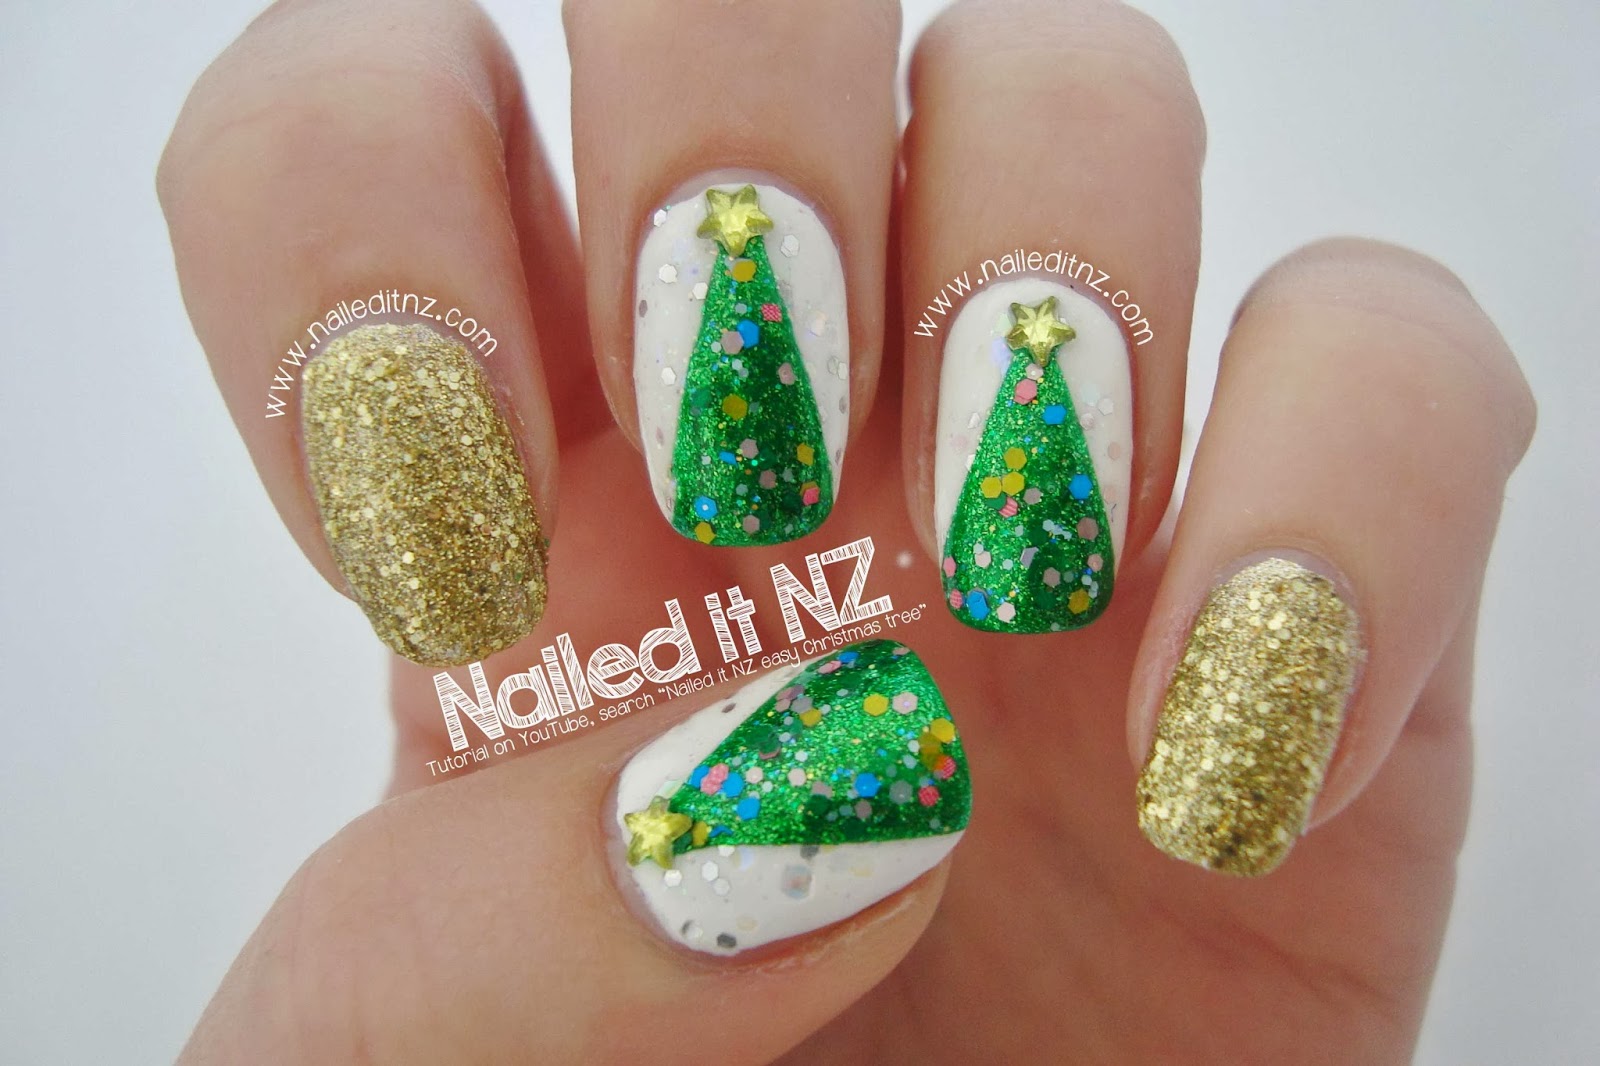 1. "Palm Tree Nail Art Tutorial with Christmas Decorations" - wide 2